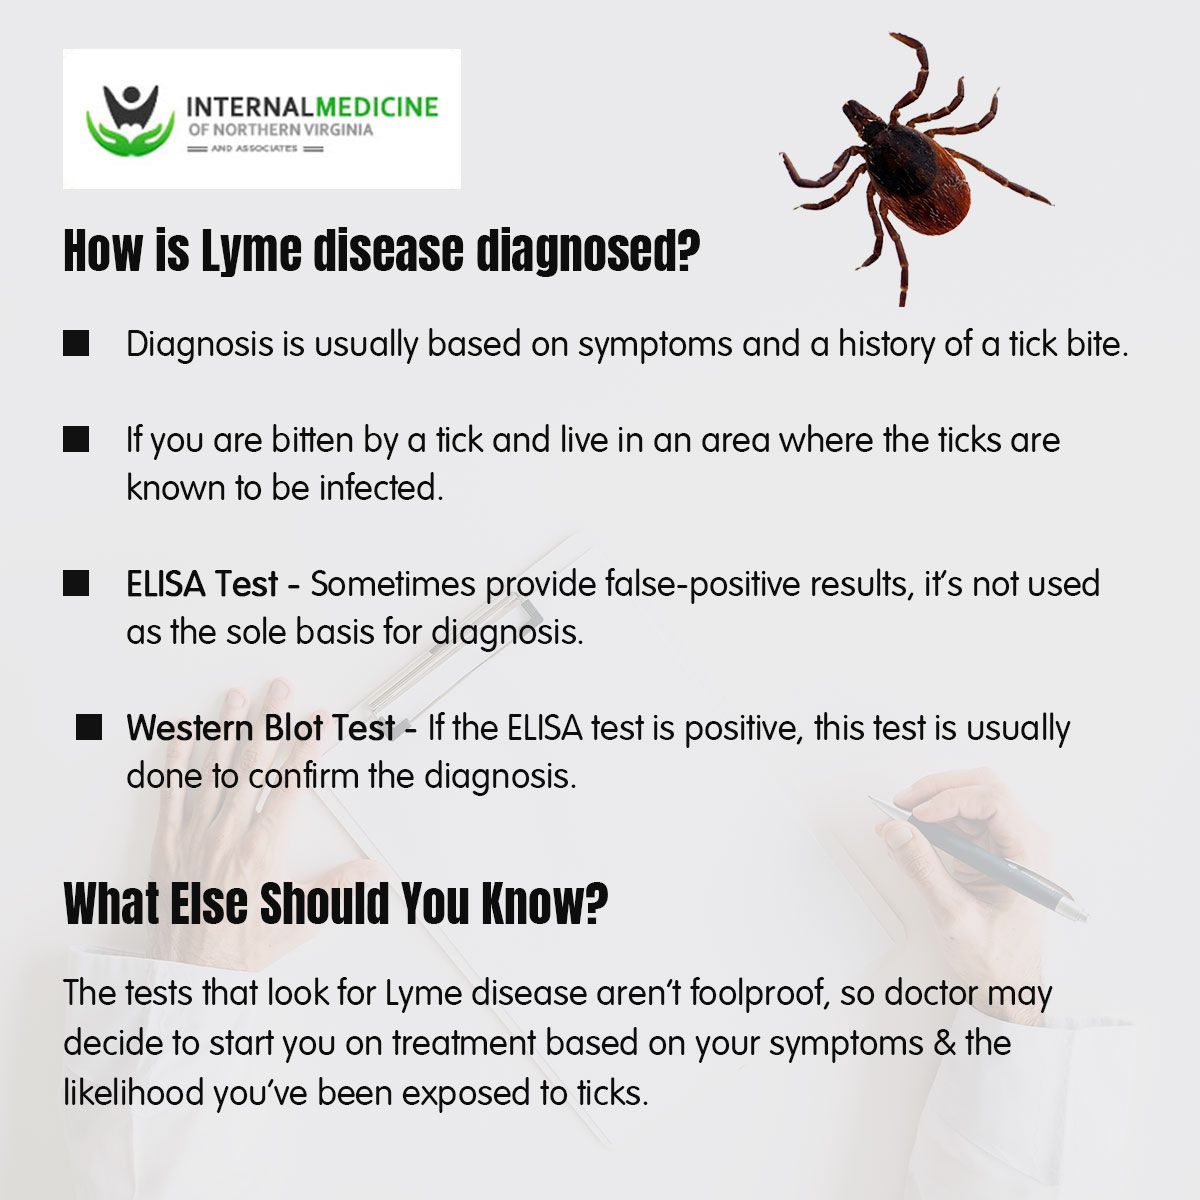 How is Lyme disease diagnosed?